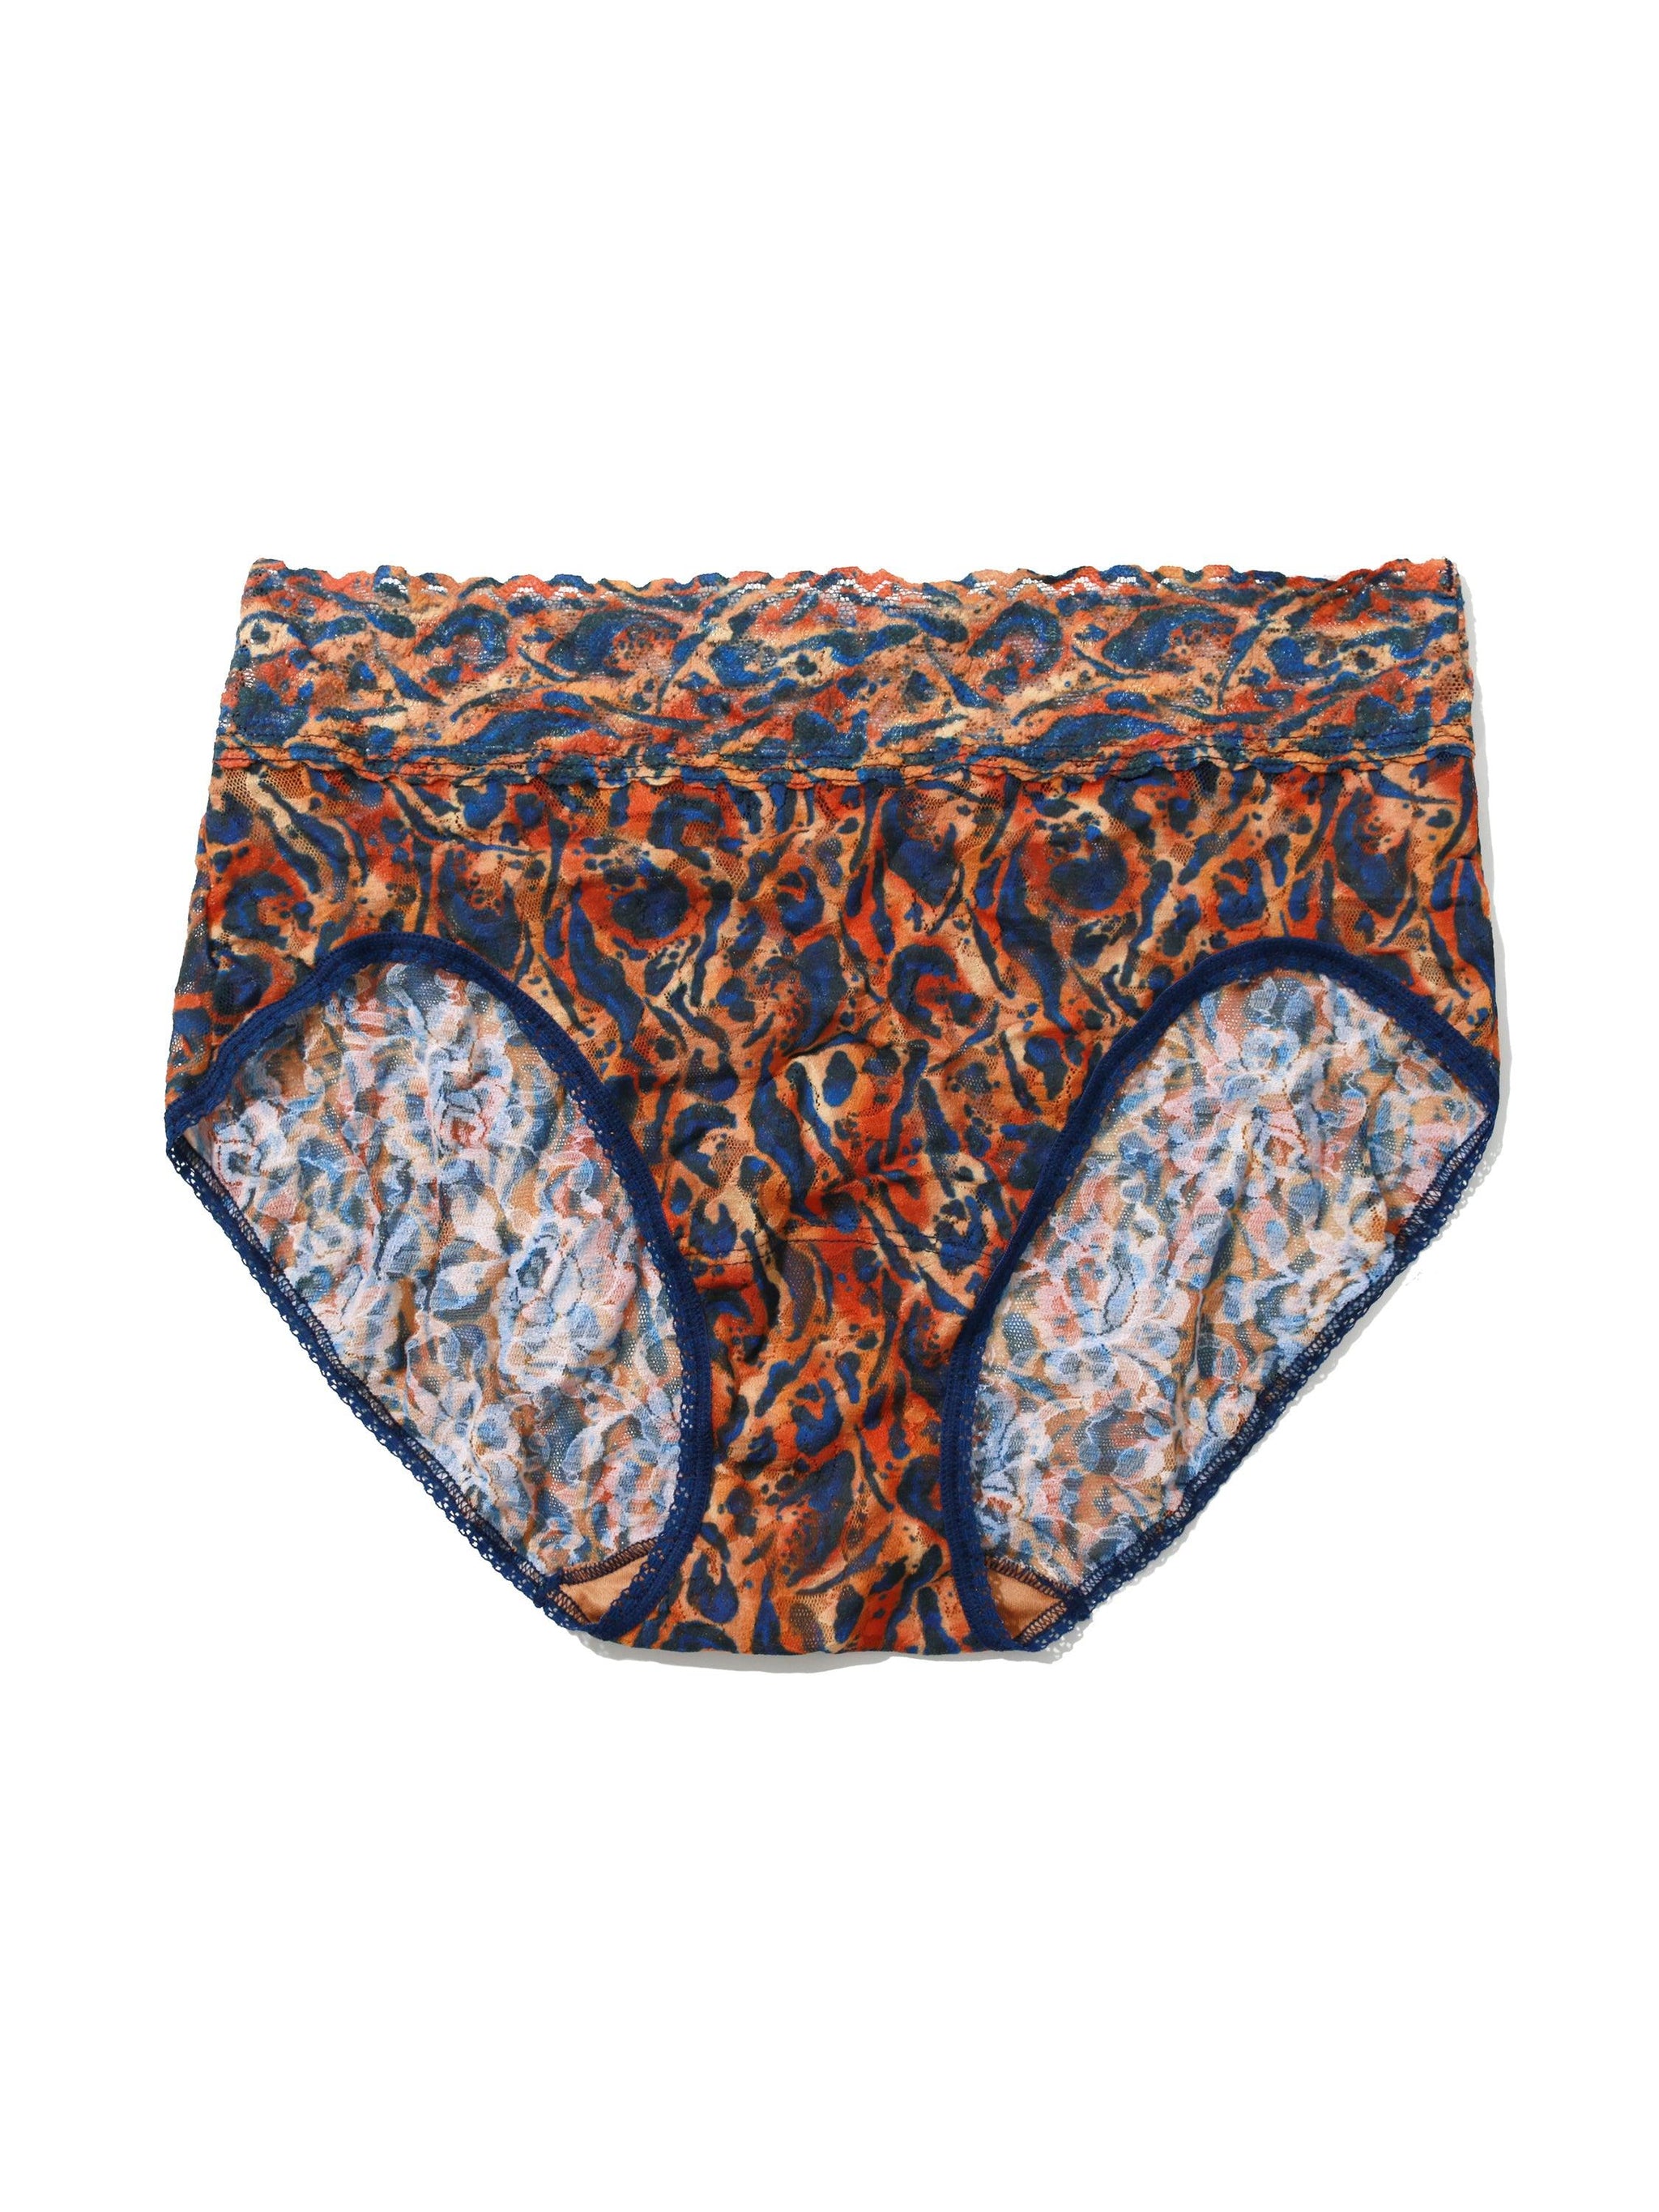 Printed Signature Lace French Brief Wild About Blue